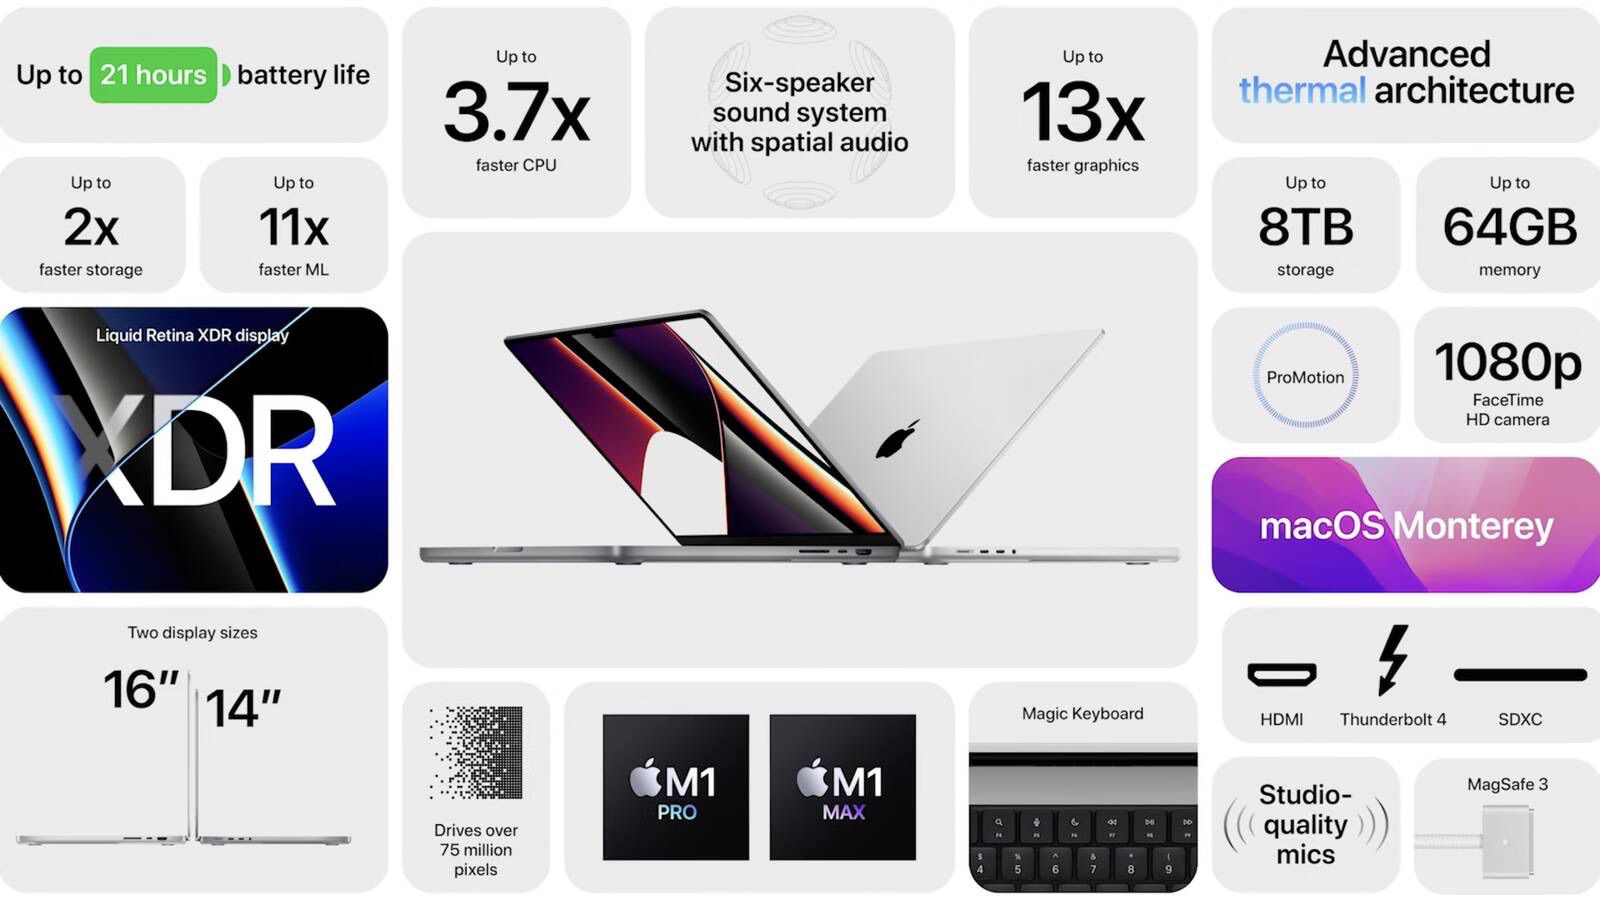 New MacBook Offer Up to 10 Hours Longer Battery Life Than Prior-Generation - MacRumors